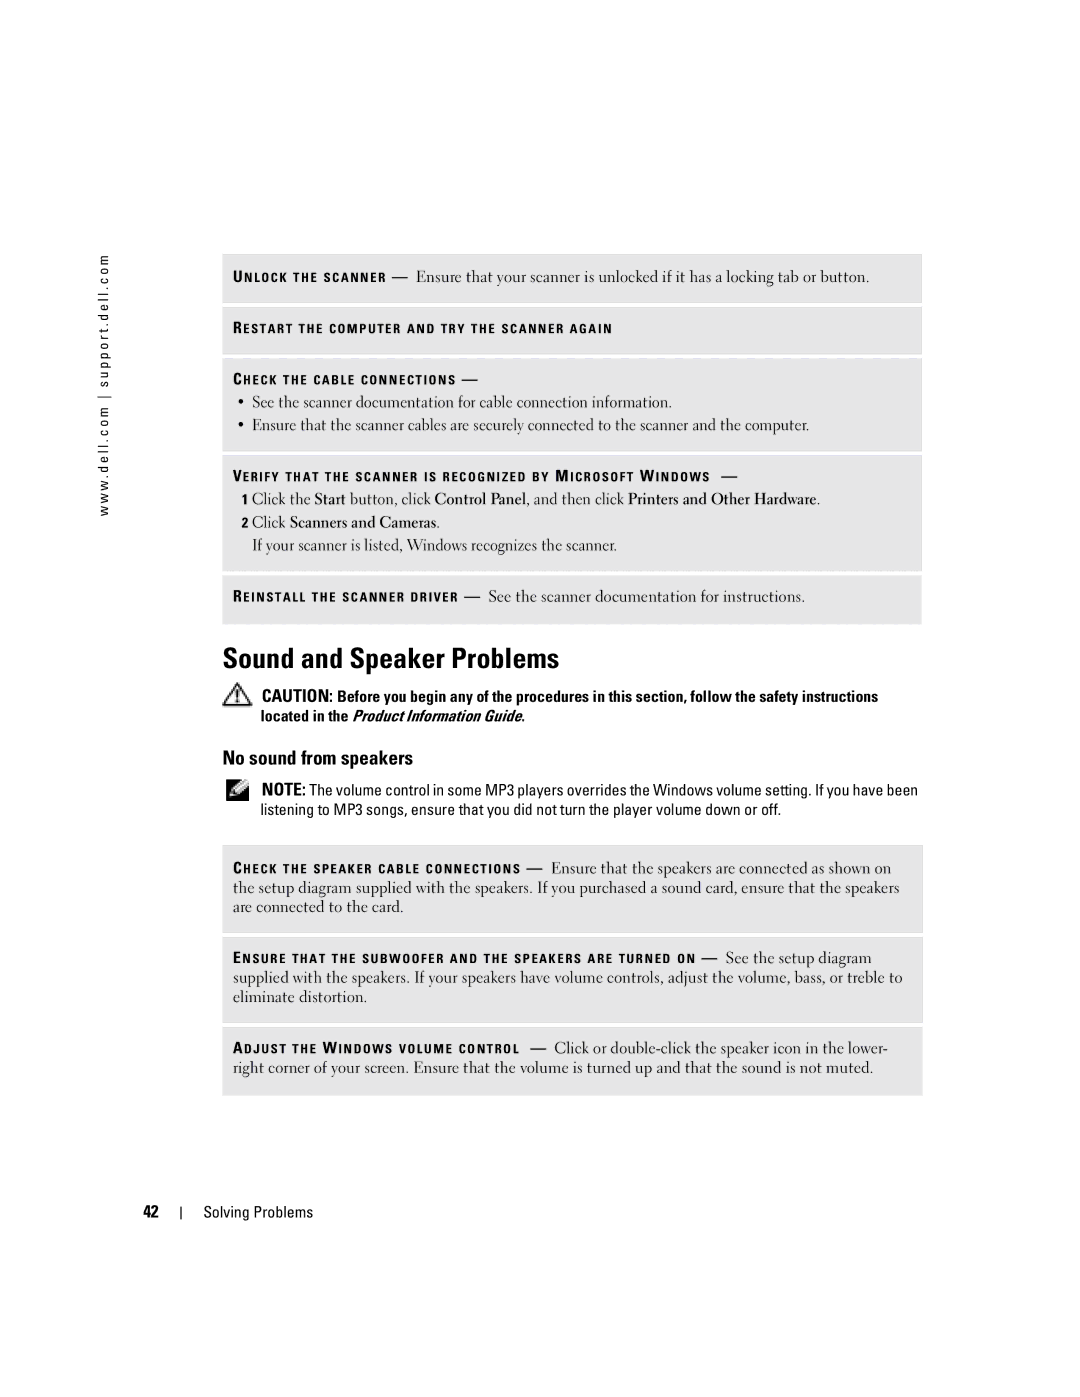 Dell XPS GEN 3 manual Sound and Speaker Problems, No sound from speakers 